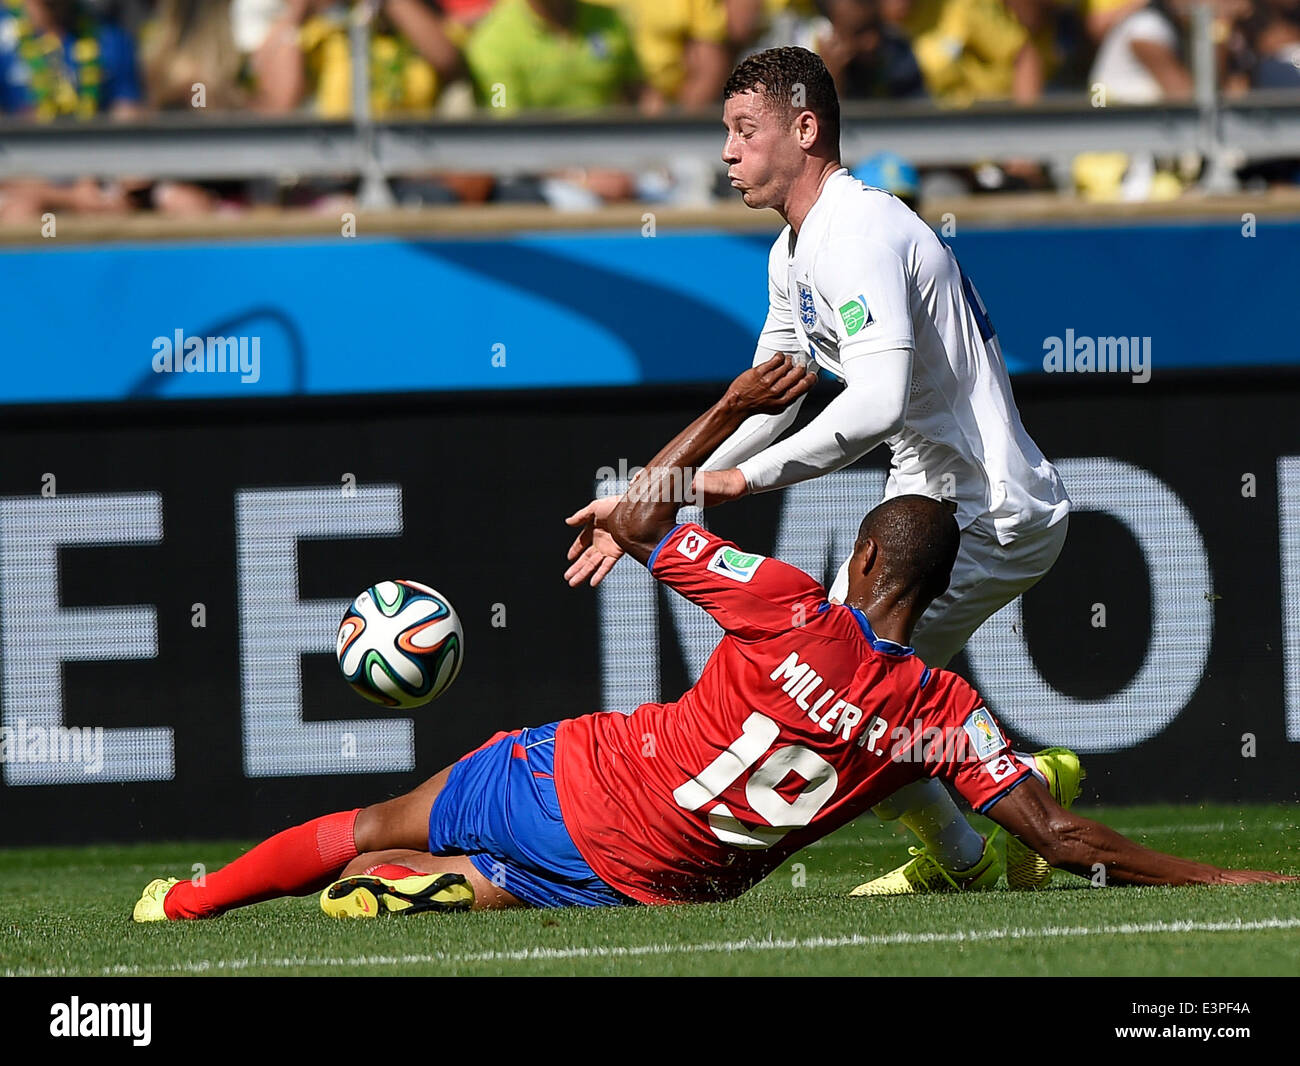 Belo Horizonte, Brazil. 24th June, 2014. England's Ross Barkely (R) vies with Costa Rica's Roy Miller during a Group D match between Costa Rica and England of 2014 FIFA World Cup at the Estadio Mineirao Stadium in Belo Horizonte, Brazil, on June 24, 2014. England drew 0-0 with Costa Rica on Tuesday. © Qi Heng/Xinhua/Alamy Live News Stock Photo